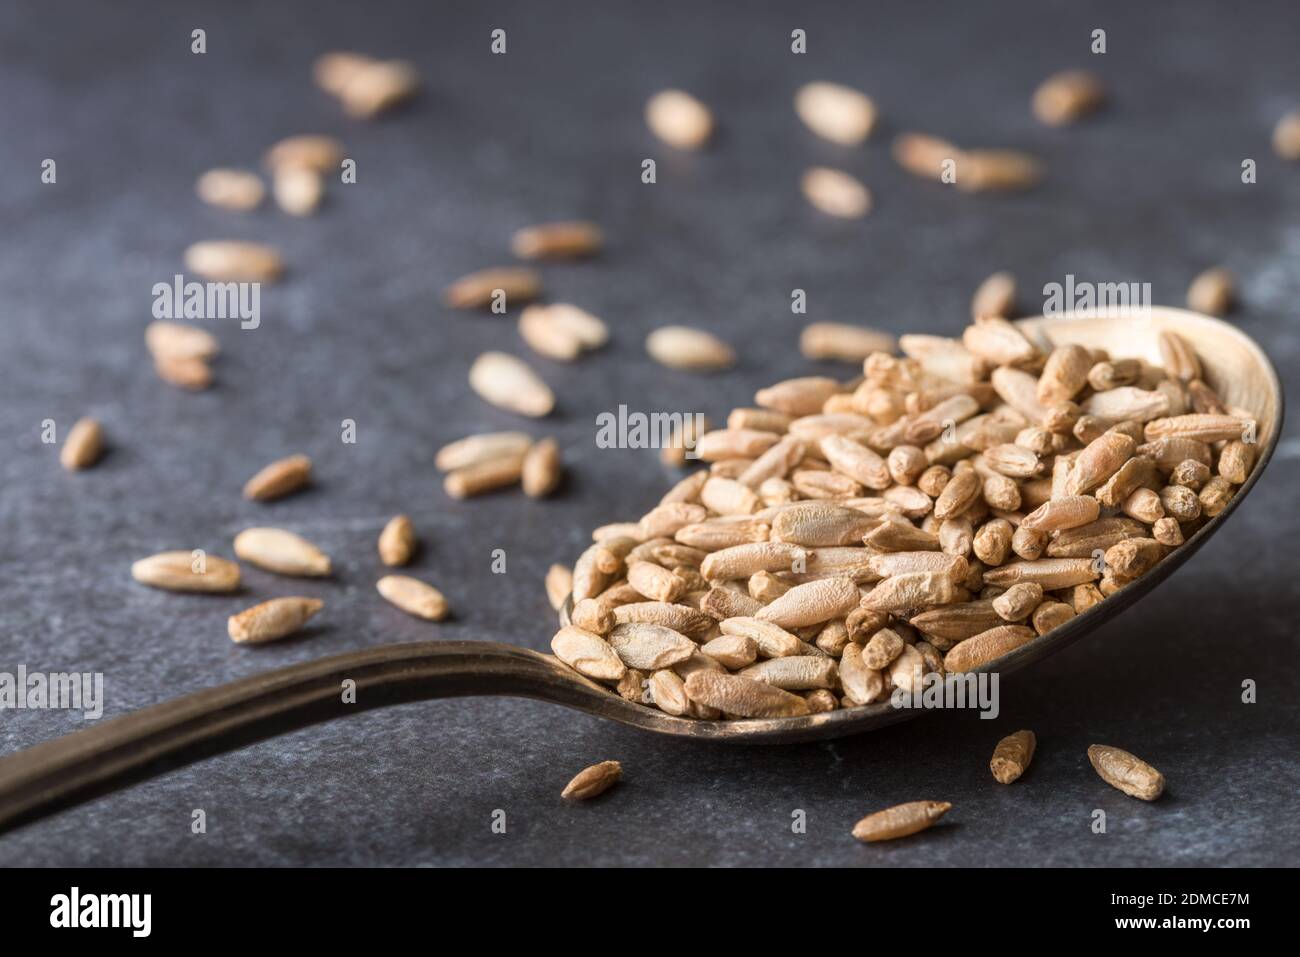 Close-up Of Groats In Spoon On Table Stock Photo